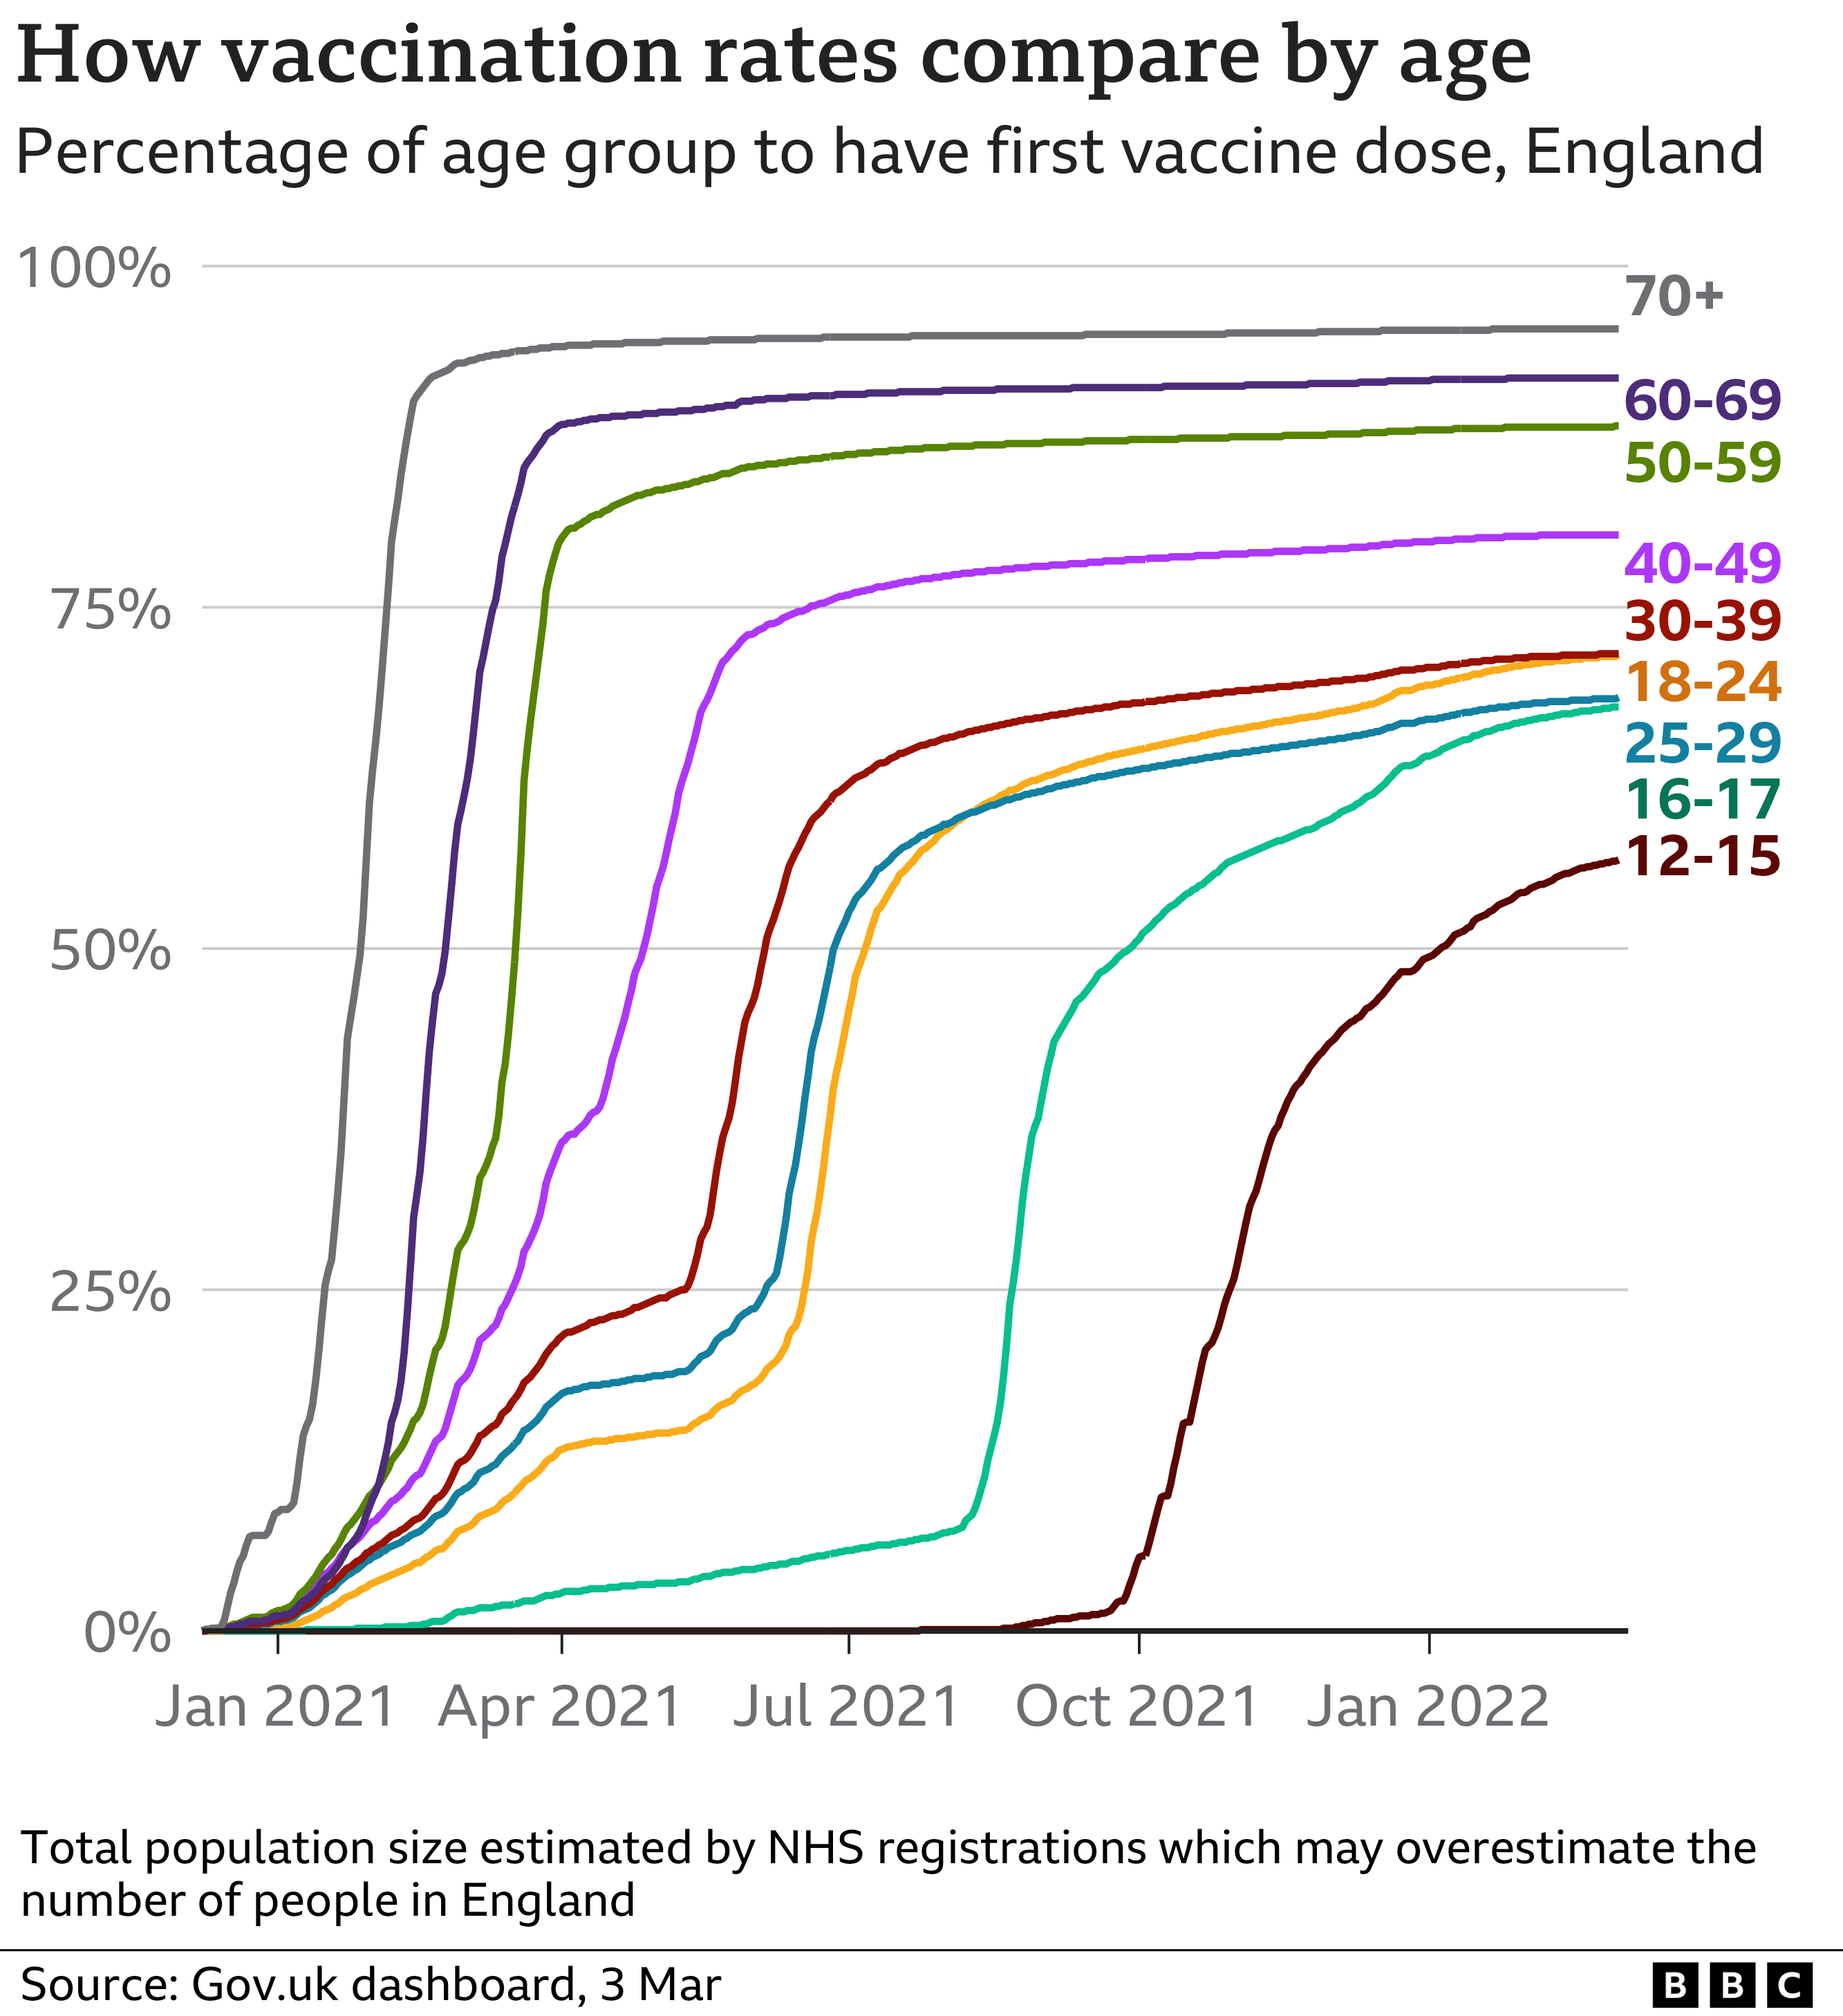 Chart showing vaccine take up by age group